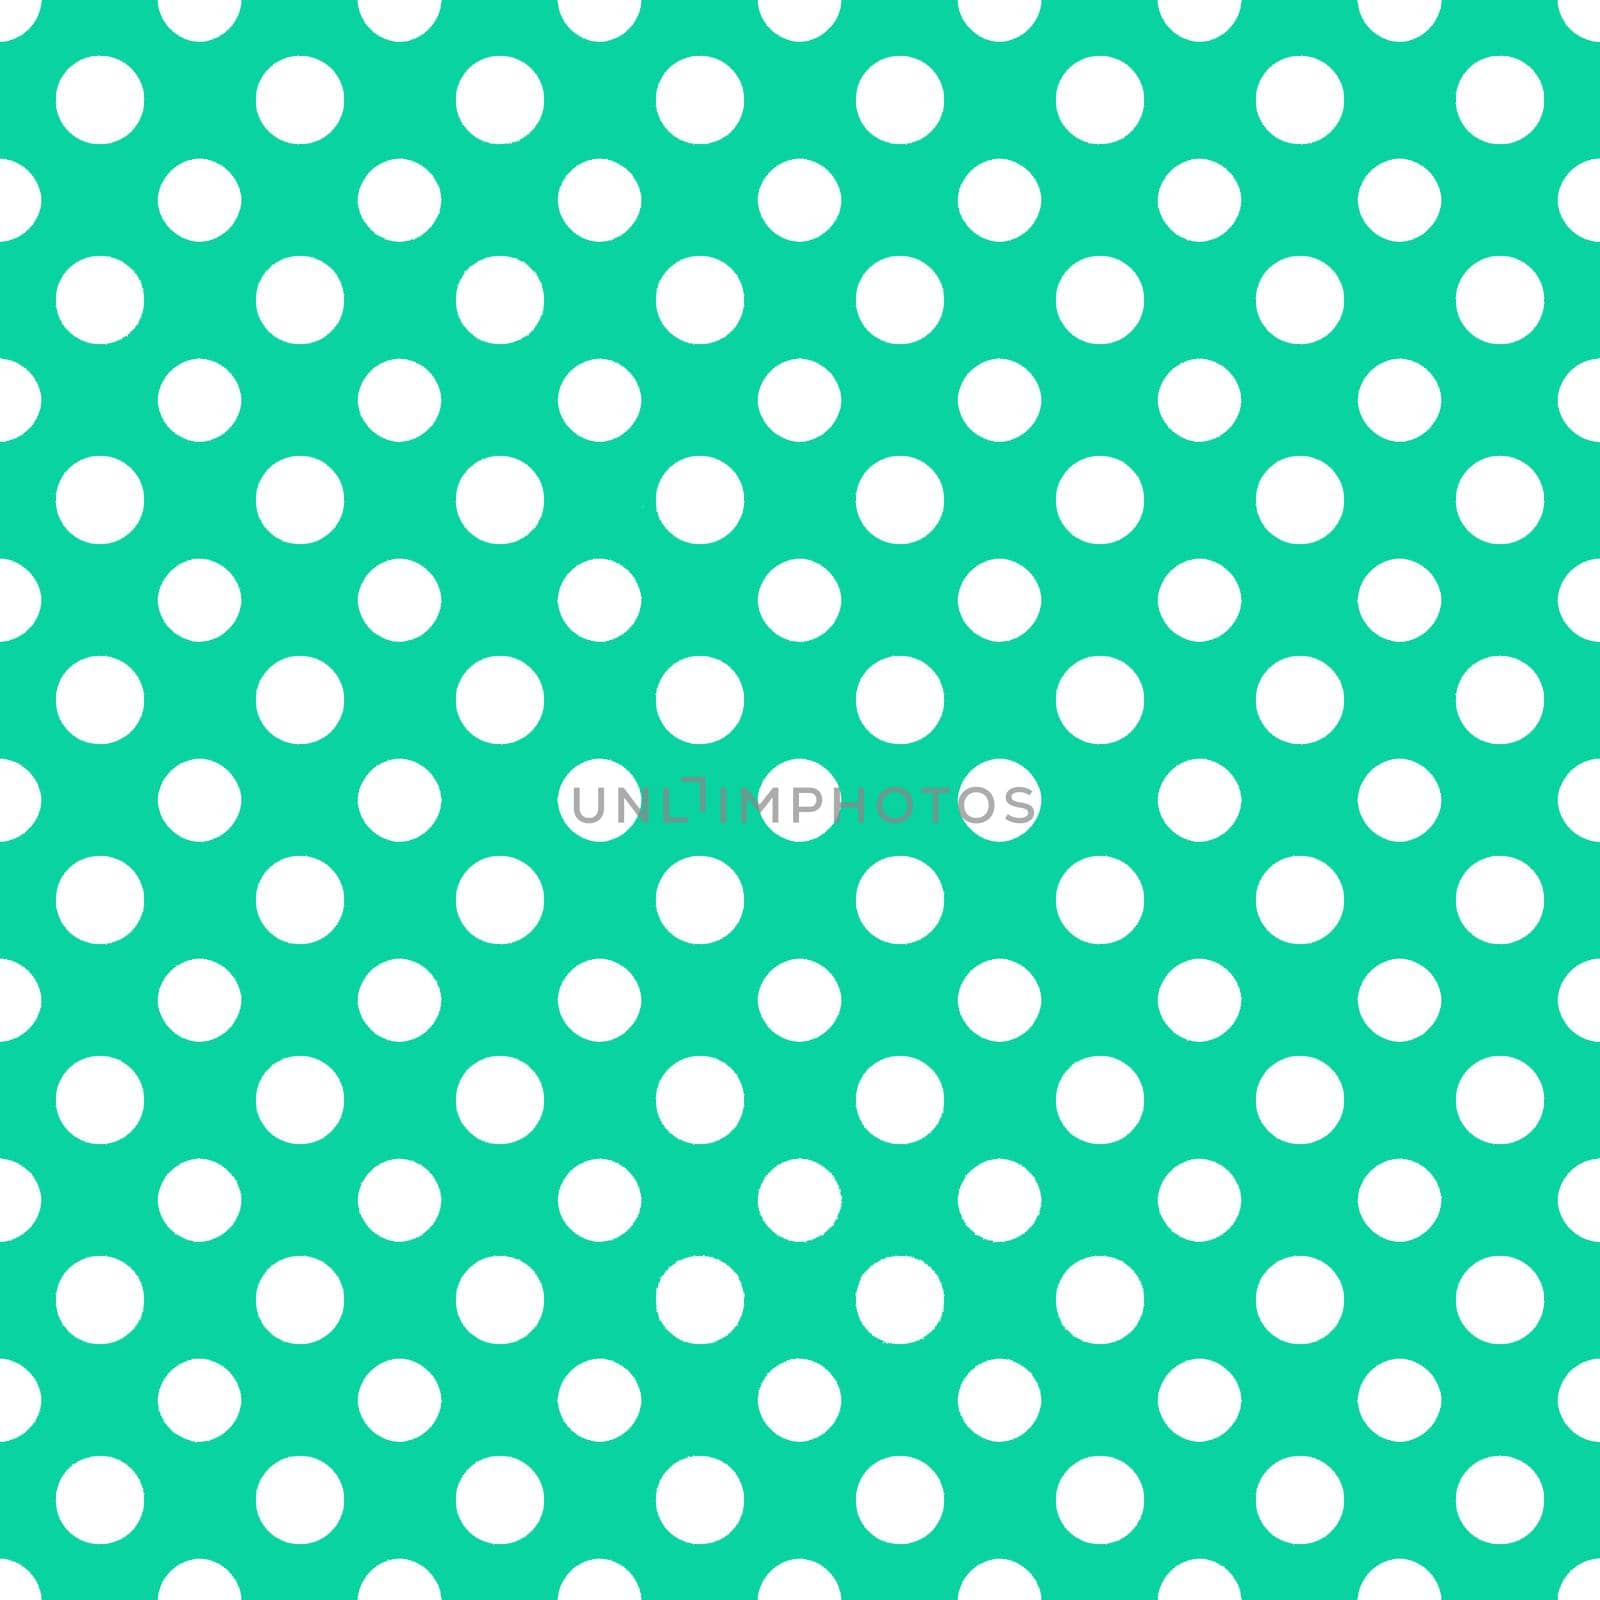 Green background with white polka dots